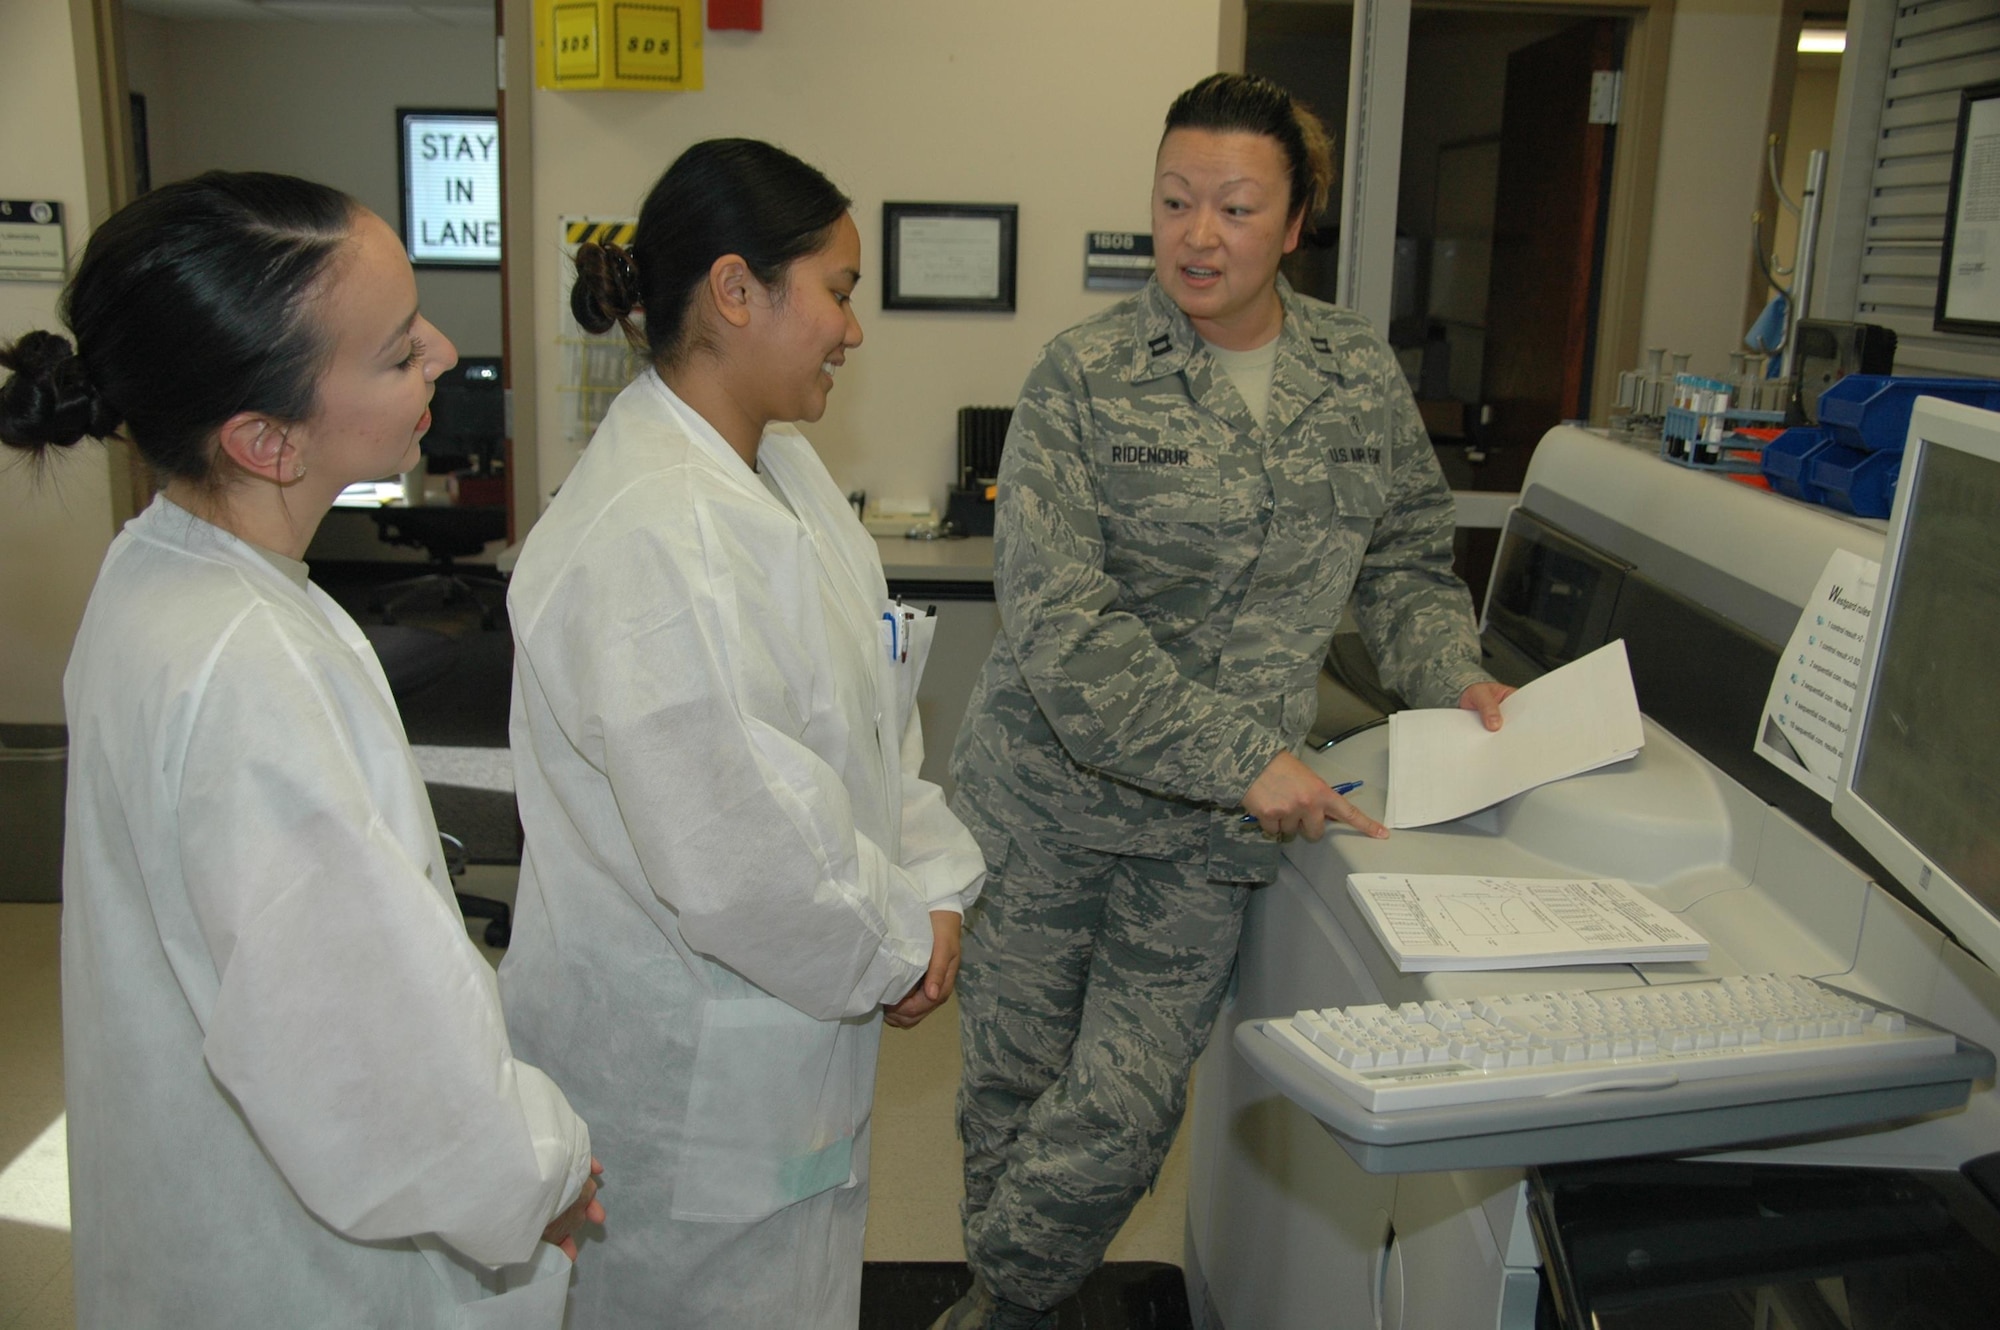 Capt. Dorothy Ridenour, chief of the 61st Medical Squadron’s Diagnostic Element at Los Angeles Air Force Base in El Segundo, California, shares the results of chemistry linearity studies from the College of American Pathologists to Staff Sgt. Laurie-Mhae Turla, center, and Senior Airman Jennifer Toney, 61st MDS medical laboratory technicians. The 61st MDS laboratory recently passed a no-notice inspection from the leading organization of board-certified pathologists. The CAP inspector stated it was the highest performing lab ever seen, rating it in the top one-half percent of all labs nationally. (U.S. Air Force photo / Jim Spellman)